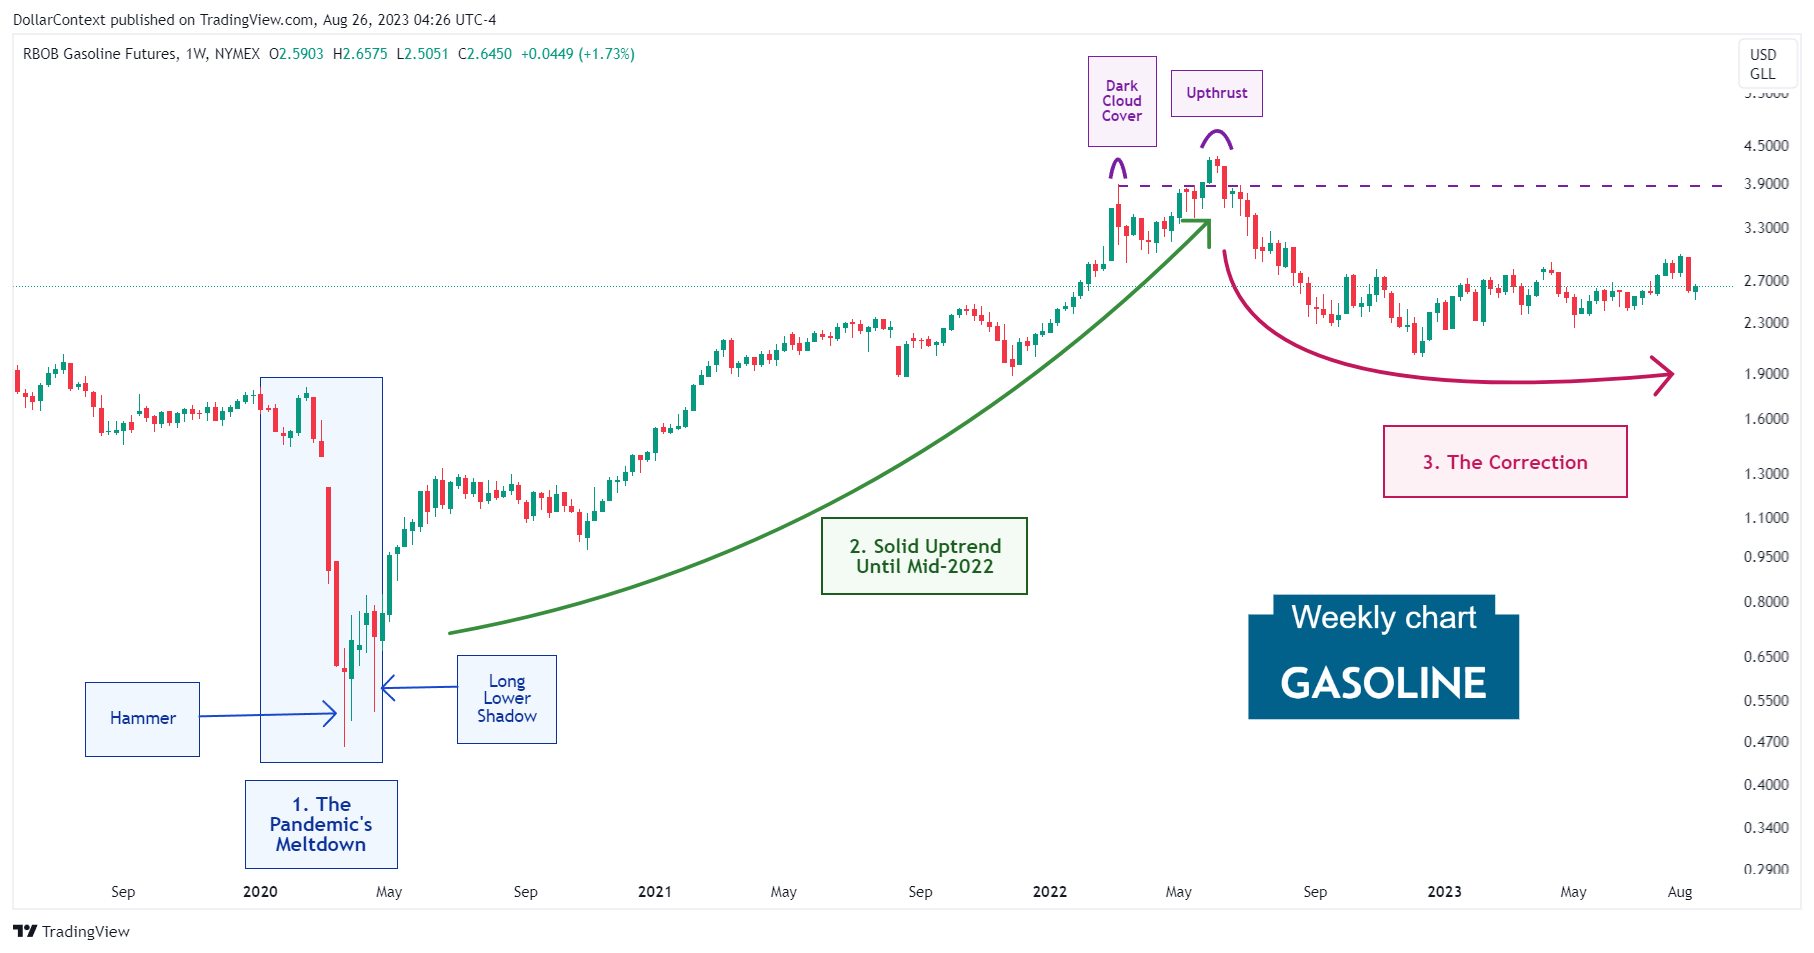 Gasoline Futures: The Correction in 2022 and First Half of 2023